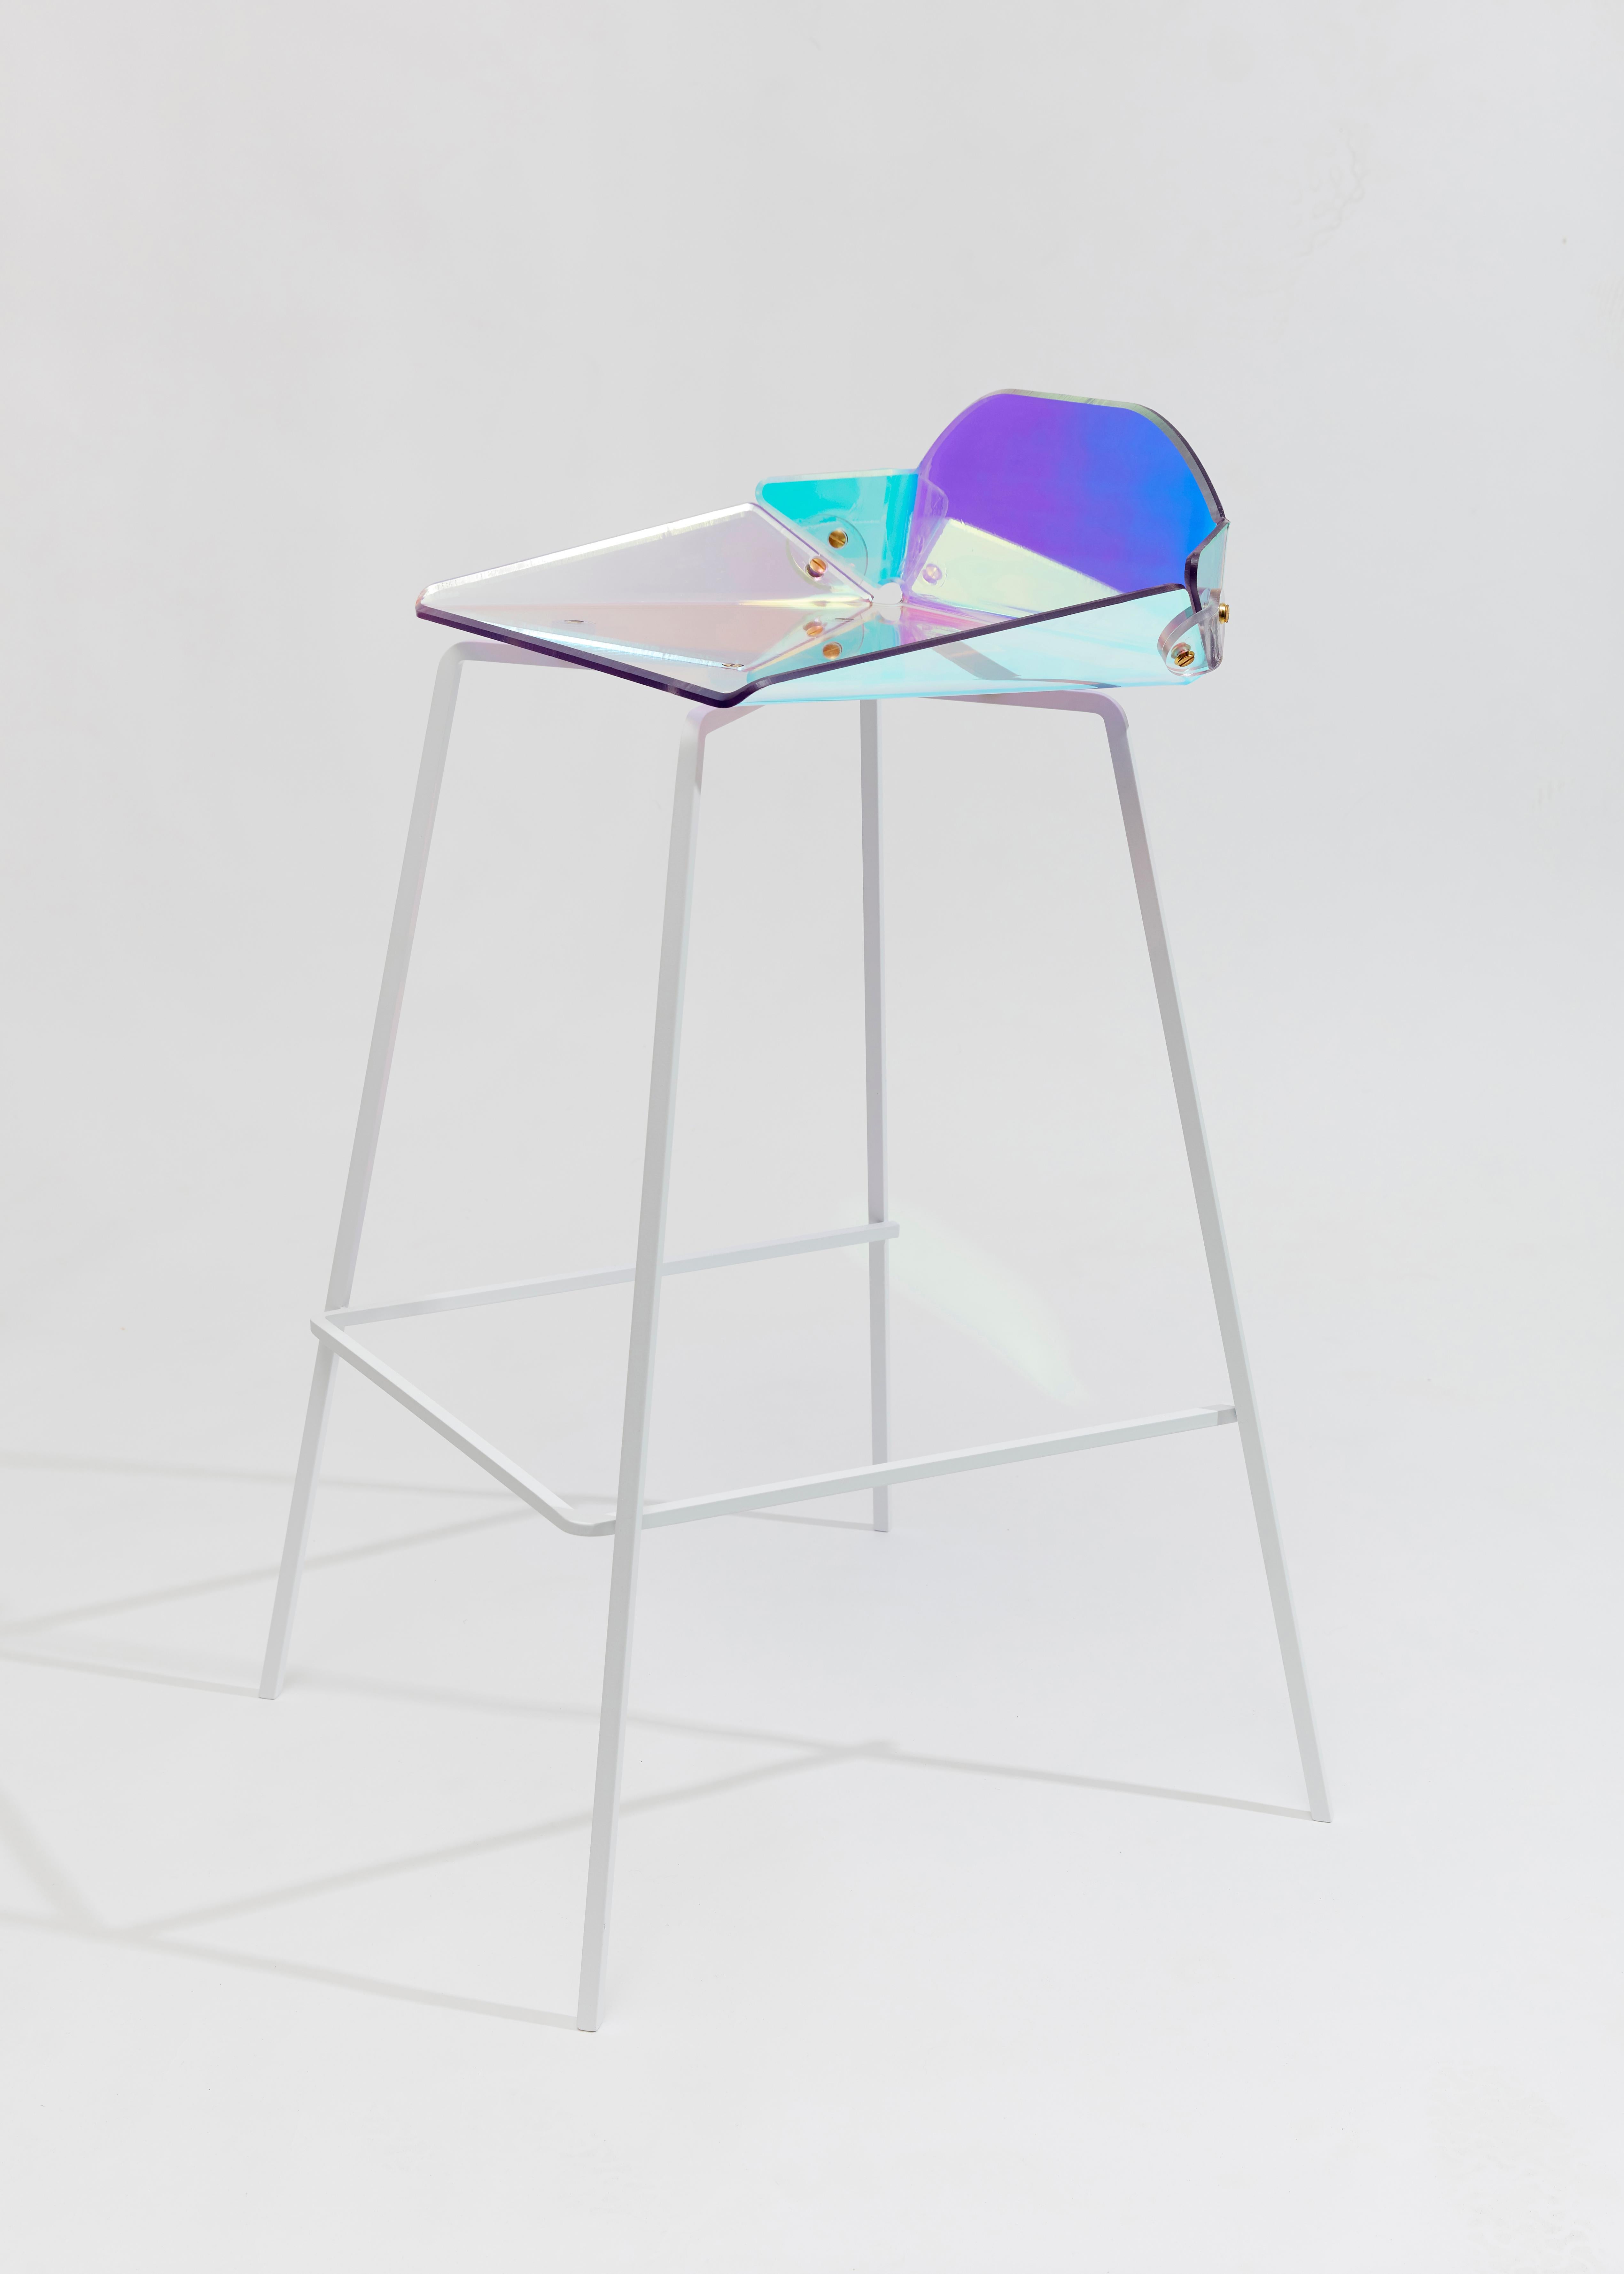 Prismania bar stool signed by Elise Luttik
Dimensions: D 54 x W 50.5 x H 88.5 cm
Materials: Polycarbonate transparent shell with a prismatic polyester film, steel, epoxy.
Also available with black base.

As a designer Elise Luttik is intrigued by